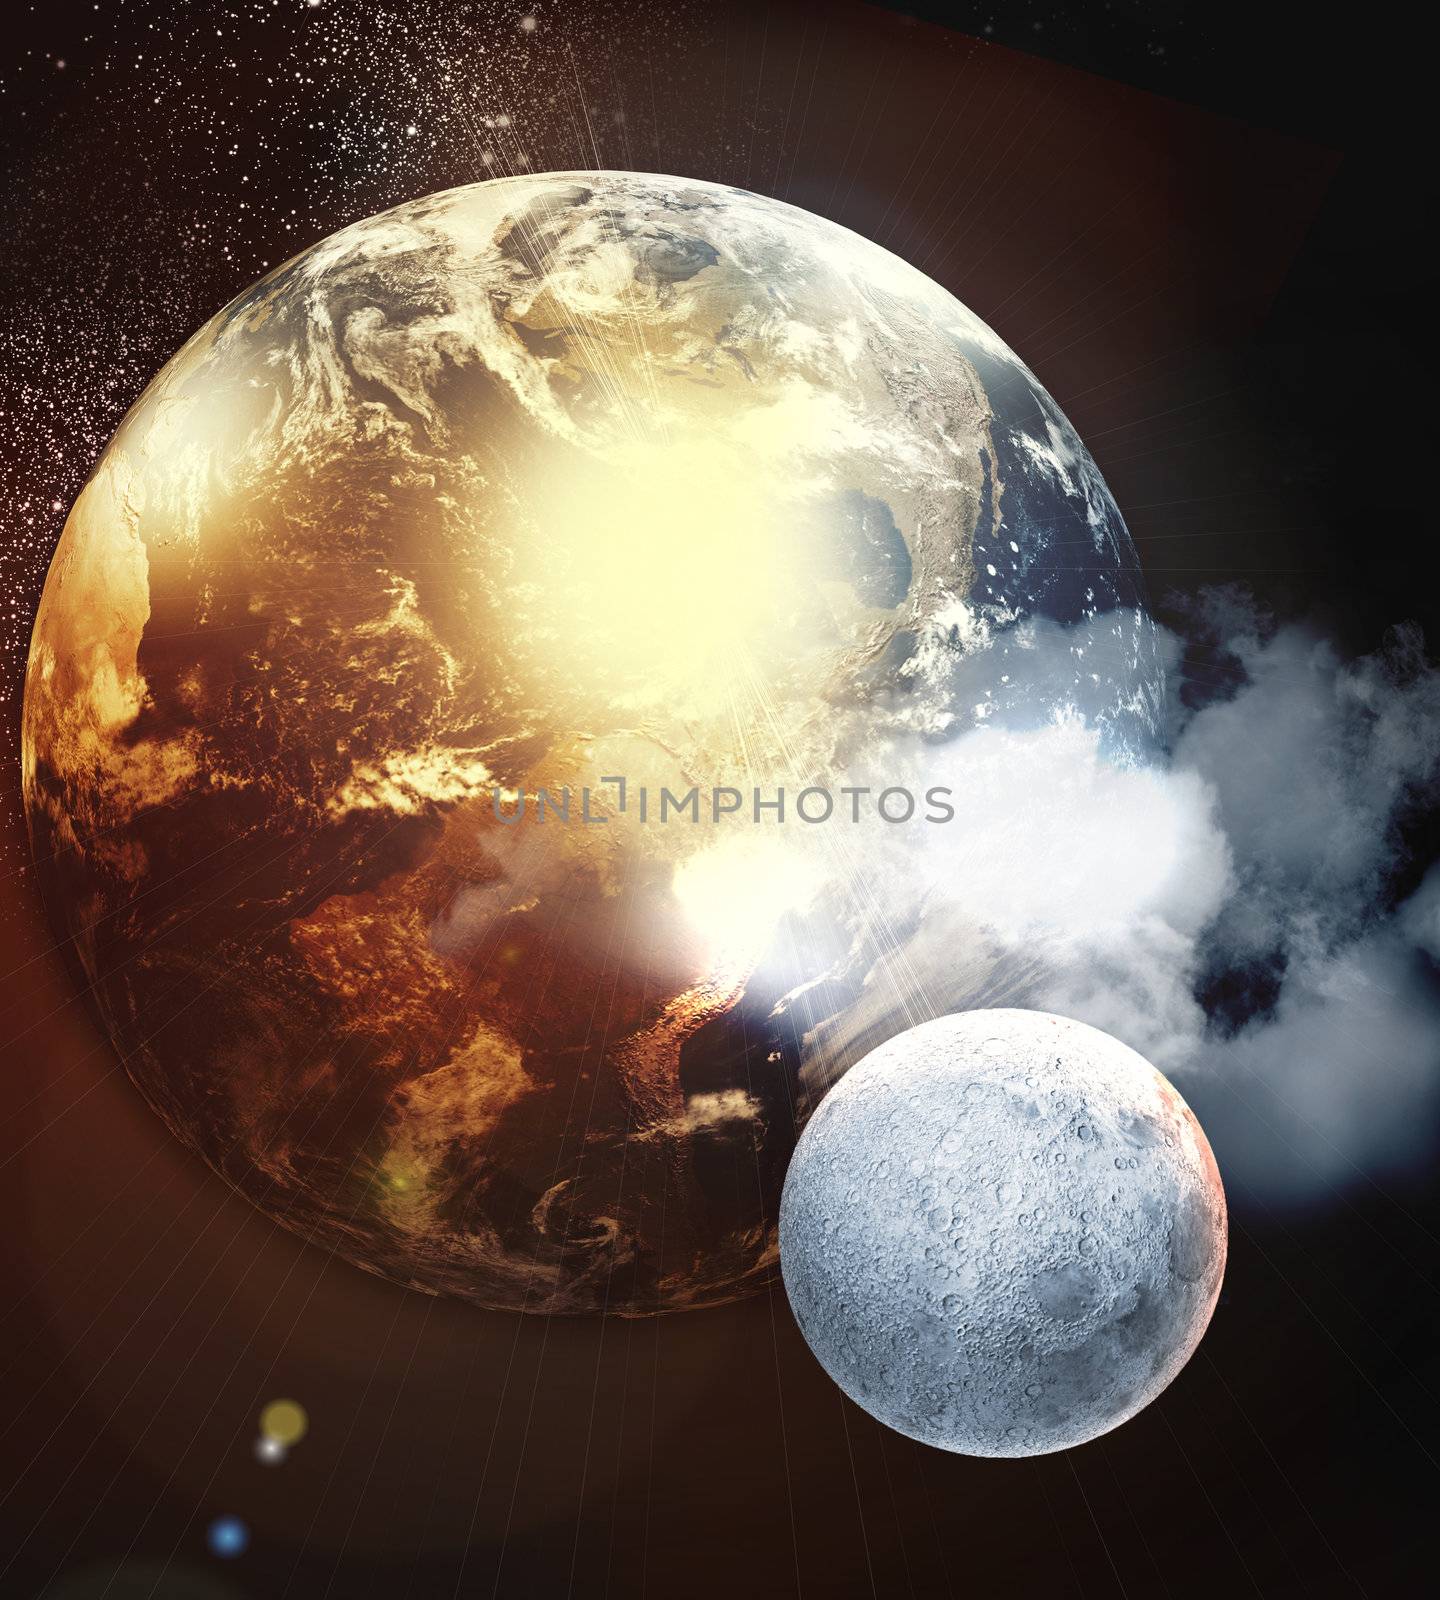 Image of planets in space by sergey_nivens